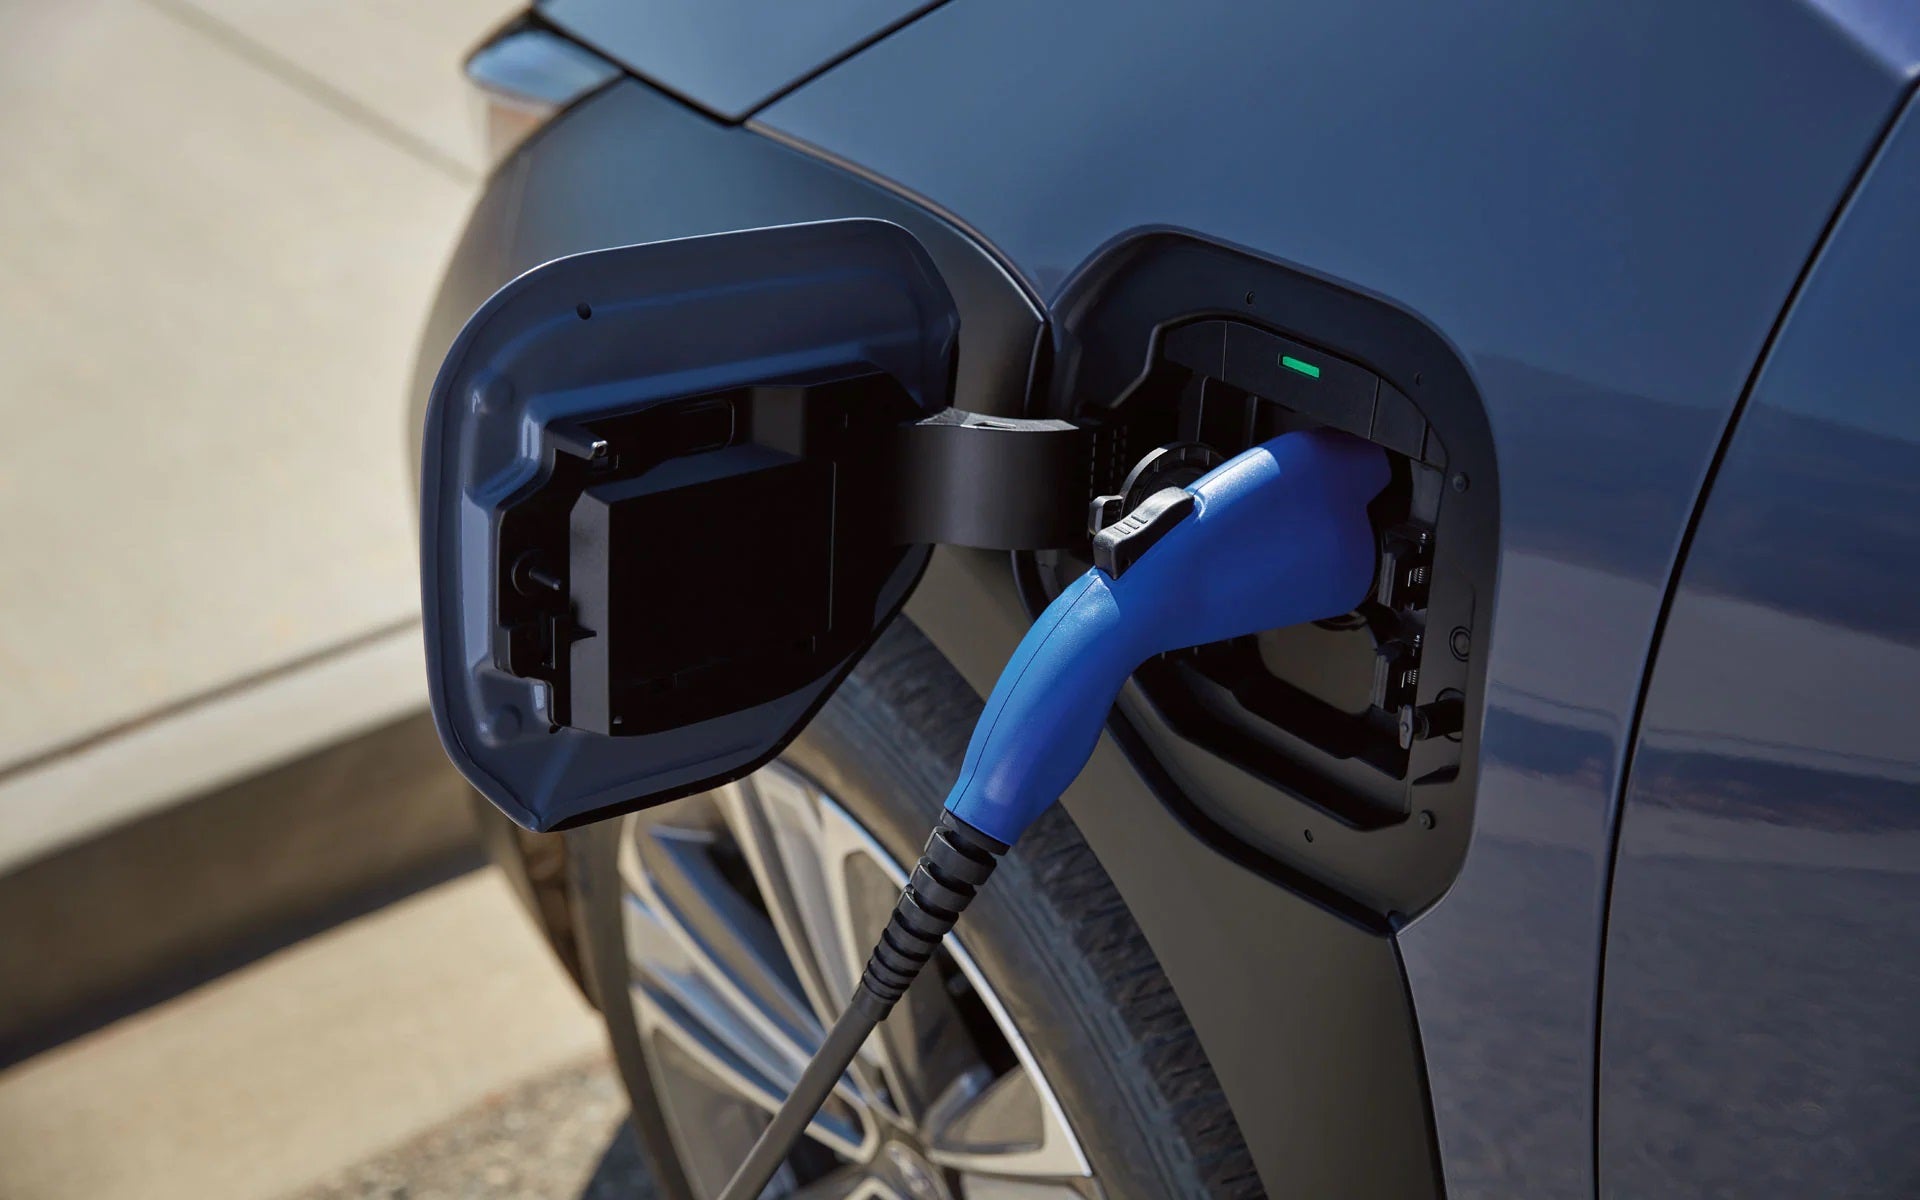 Guide to electric vehicles | Sommer's Subaru in Mequon WI